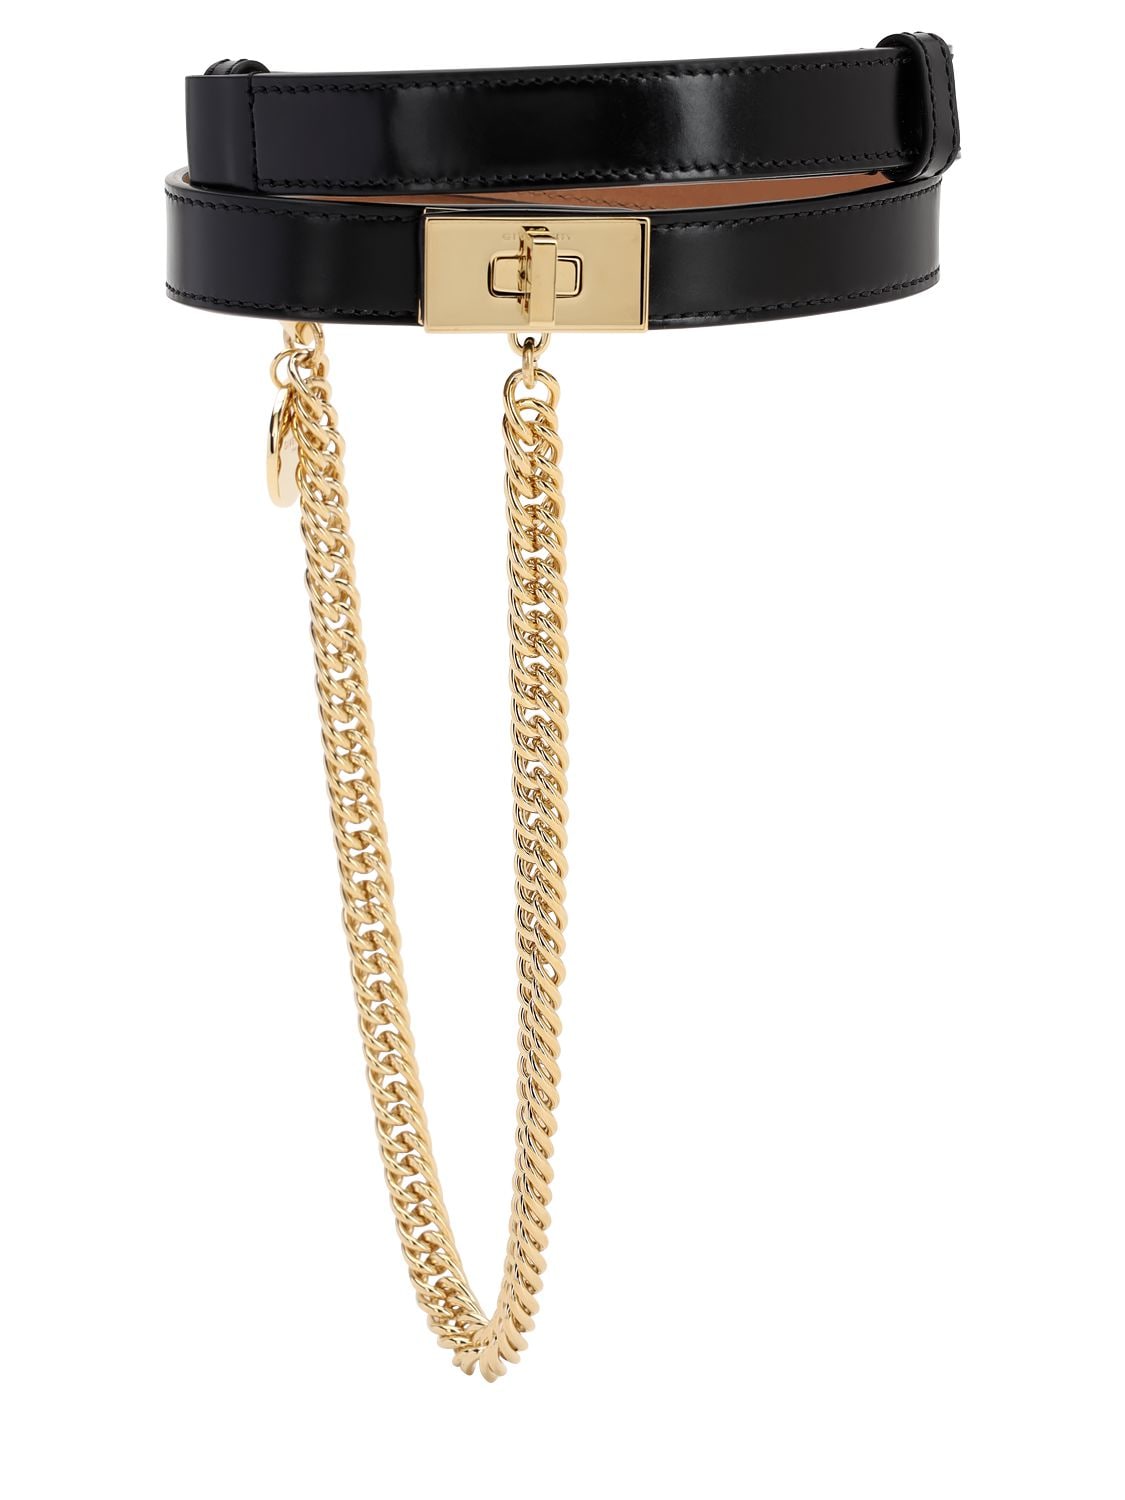 Givenchy 20mm Smooth Leather Belt W/ Chain In Black